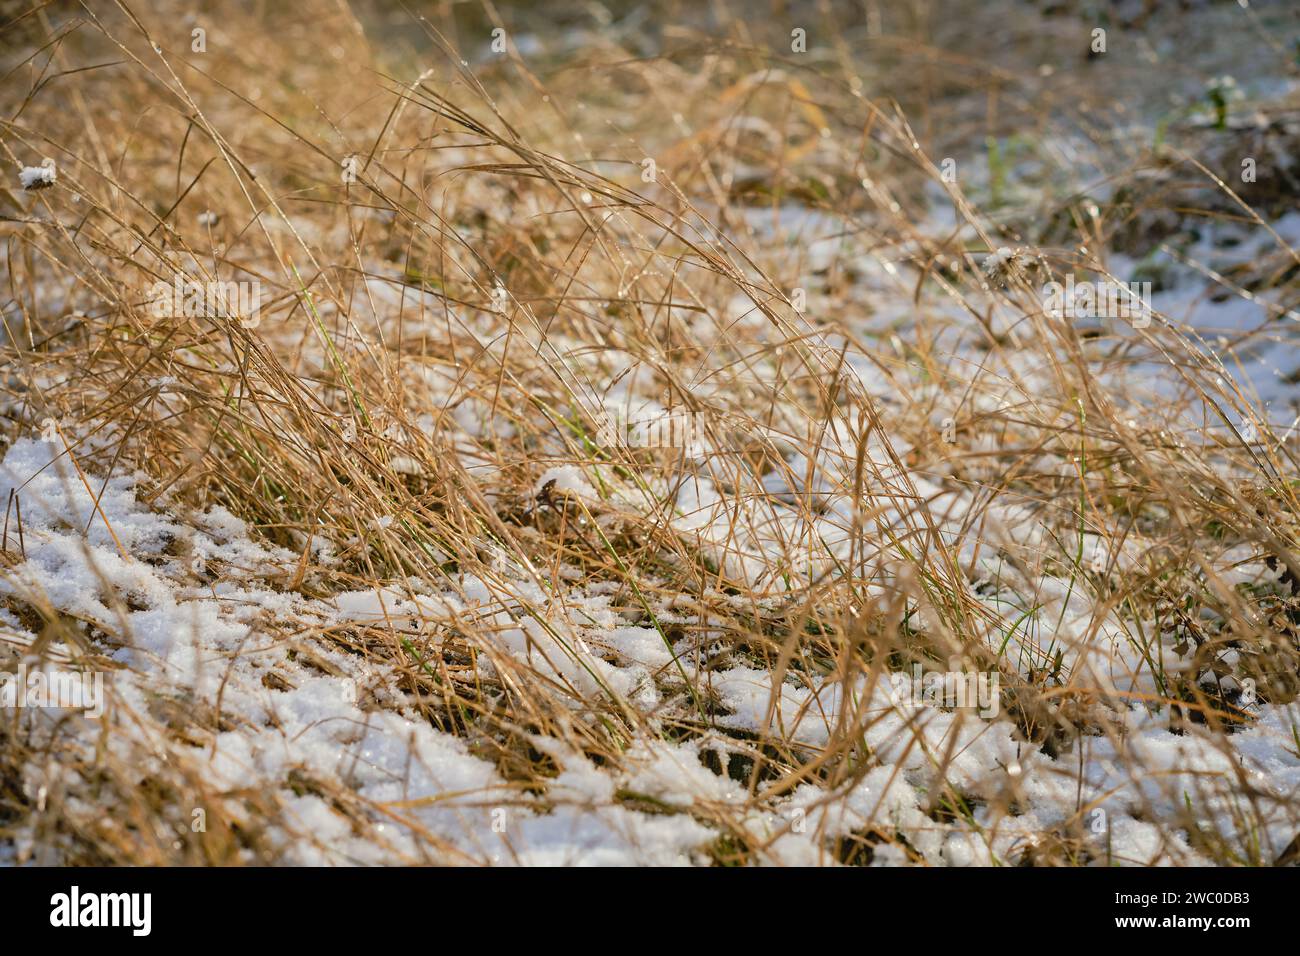 Dry grass in a snowy field, advertising campaign concept banner or product mockup for winter health care in dry climate Stock Photo